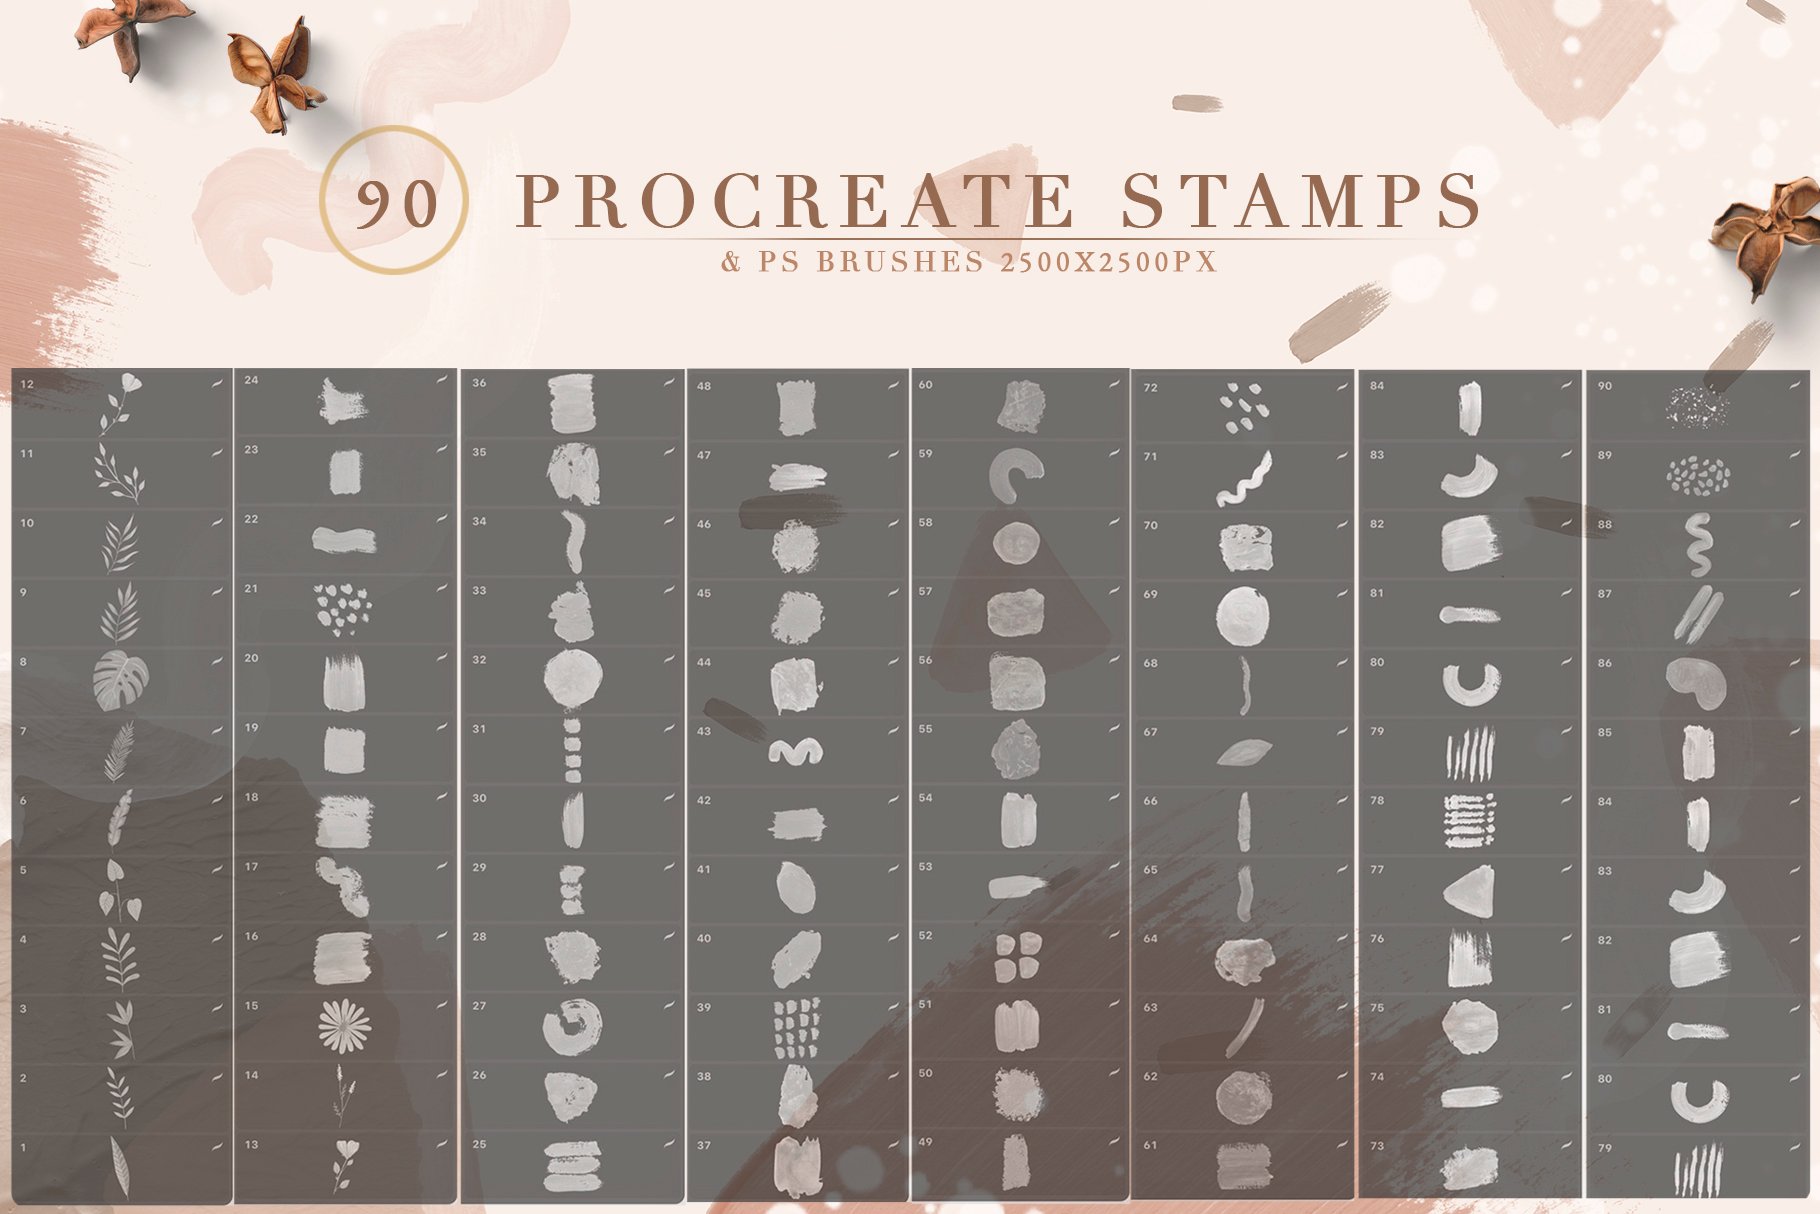 Buttermilk Procreate Stamps & Photoshop Brushes